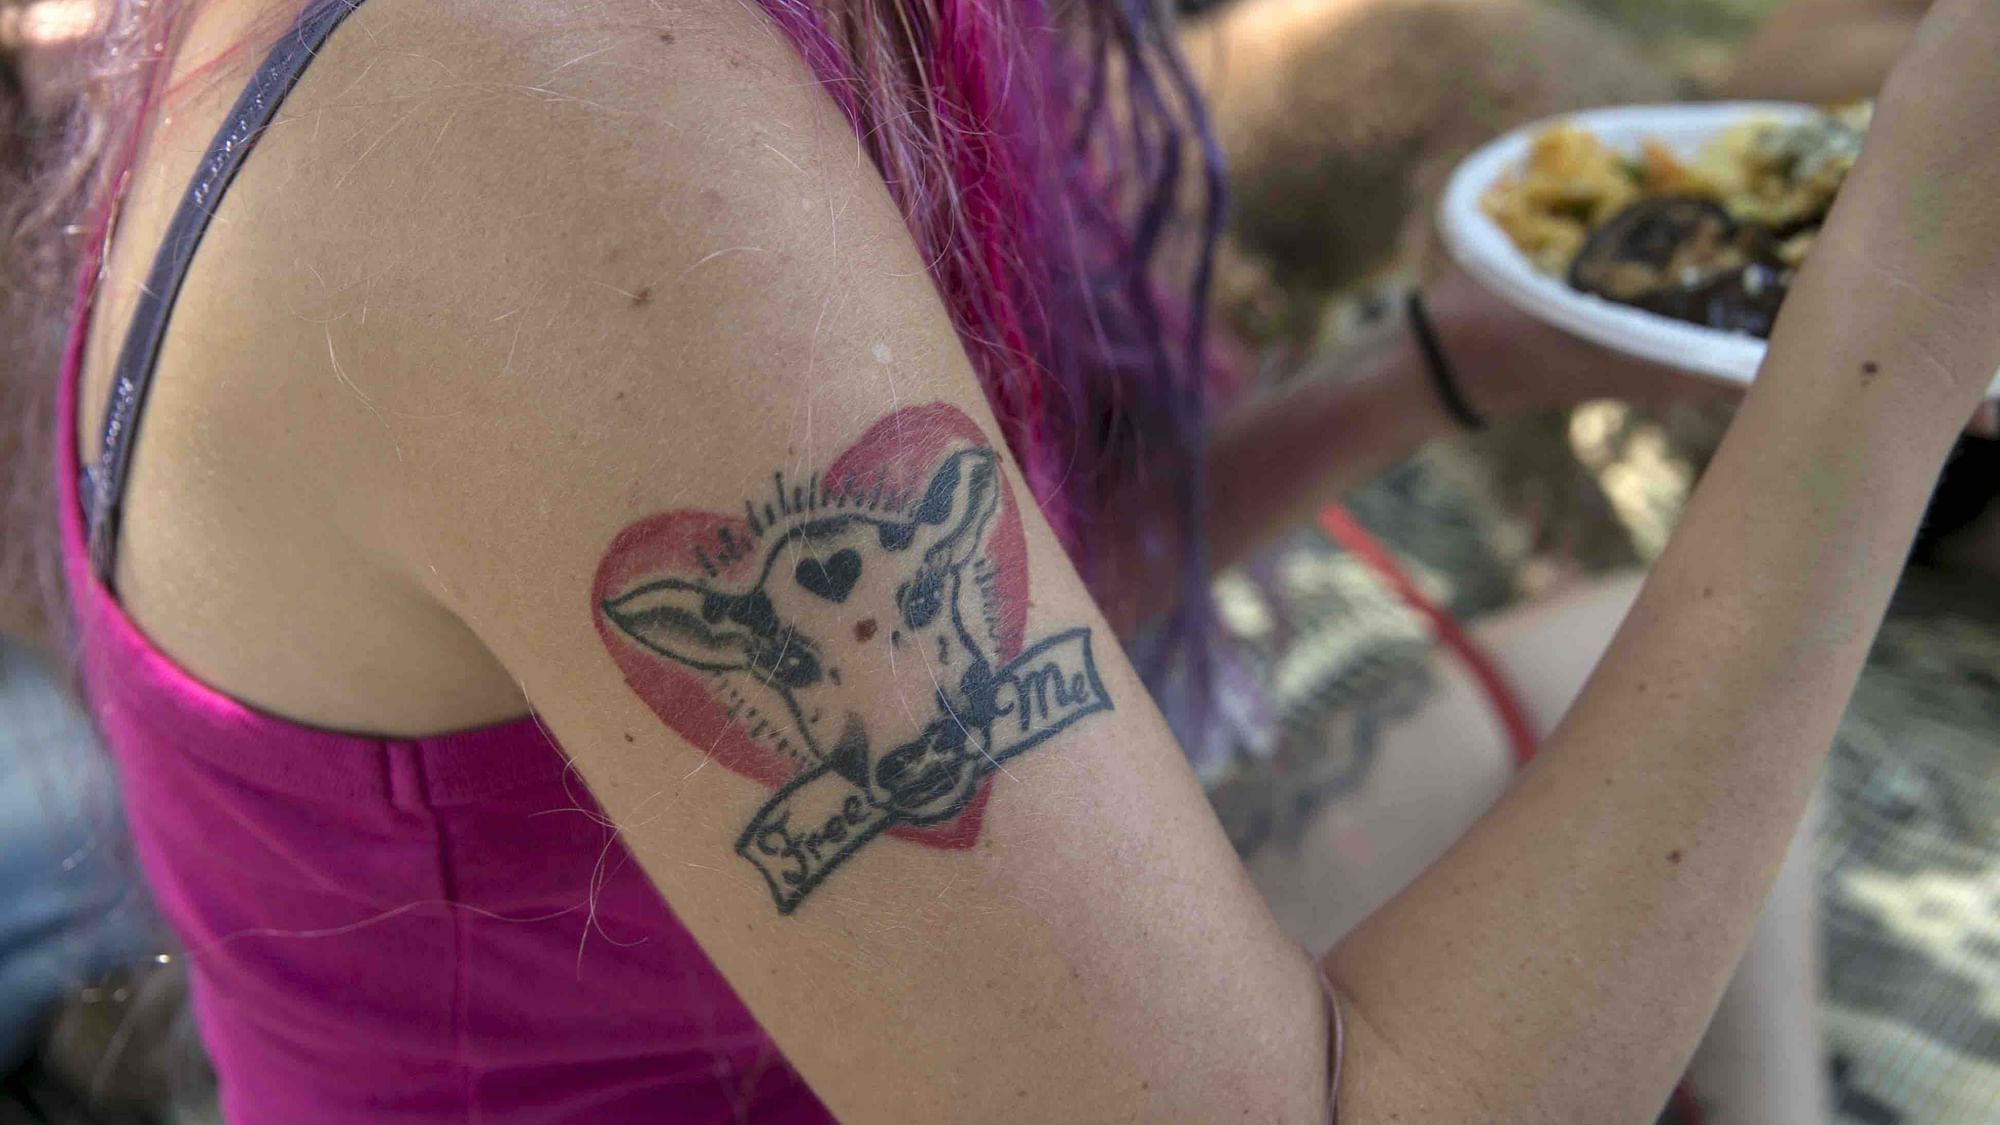 A tattoo is seen on the arm of a woman attending a vegan picnic at Hayarkon Park in Tel Aviv, Israel July 18, 2015. A growing trend has transformed Israel’s financial center into a haven for meatless cuisine. Some 400 food establishments are certified “vegan friendly,” including Domino’s Pizza, the first in the global chain to sell vegan pizza topped with non-dairy cheese. (Photo: Reuters)